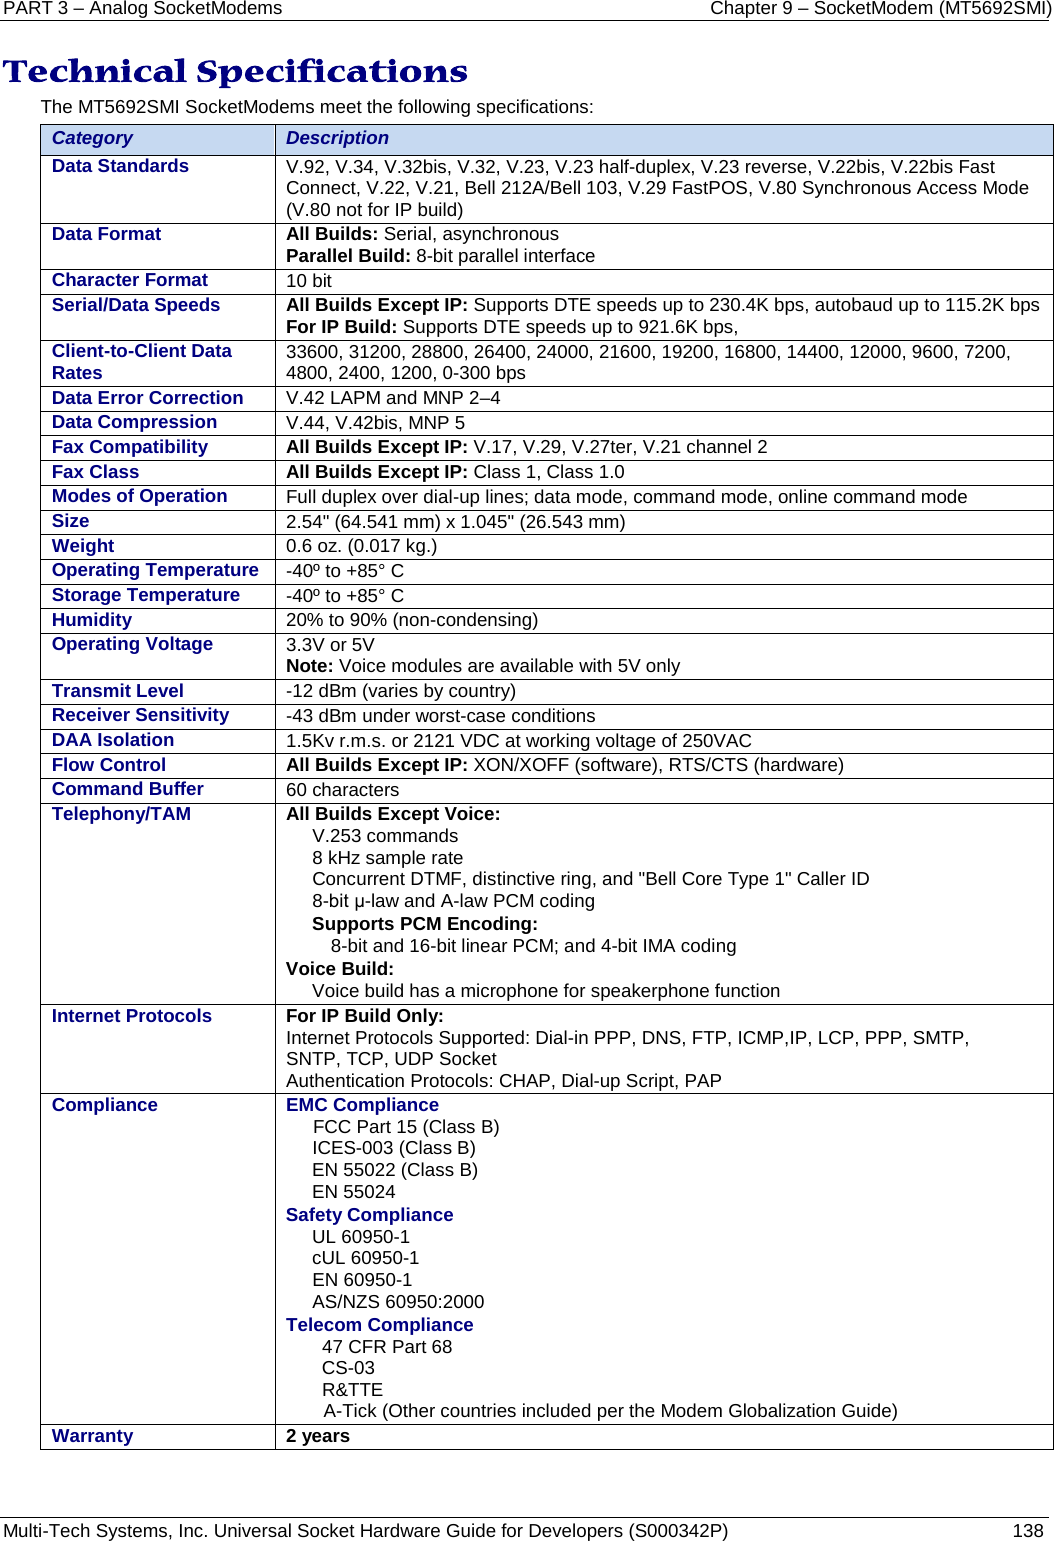 PART 3 – Analog SocketModems    Chapter 9 – SocketModem (MT5692SMI) Multi-Tech Systems, Inc. Universal Socket Hardware Guide for Developers (S000342P)  138  Technical Specifications  The MT5692SMI SocketModems meet the following specifications:  Category Description Data Standards V.92, V.34, V.32bis, V.32, V.23, V.23 half-duplex, V.23 reverse, V.22bis, V.22bis Fast Connect, V.22, V.21, Bell 212A/Bell 103, V.29 FastPOS, V.80 Synchronous Access Mode (V.80 not for IP build) Data Format All Builds: Serial, asynchronous  Parallel Build: 8-bit parallel interface  Character Format 10 bit    Serial/Data Speeds  All Builds Except IP: Supports DTE speeds up to 230.4K bps, autobaud up to 115.2K bps For IP Build: Supports DTE speeds up to 921.6K bps,  Client-to-Client Data Rates 33600, 31200, 28800, 26400, 24000, 21600, 19200, 16800, 14400, 12000, 9600, 7200, 4800, 2400, 1200, 0-300 bps Data Error Correction V.42 LAPM and MNP 2–4 Data Compression V.44, V.42bis, MNP 5 Fax Compatibility  All Builds Except IP: V.17, V.29, V.27ter, V.21 channel 2  Fax Class All Builds Except IP: Class 1, Class 1.0  Modes of Operation Full duplex over dial-up lines; data mode, command mode, online command mode Size  2.54&quot; (64.541 mm) x 1.045&quot; (26.543 mm)  Weight 0.6 oz. (0.017 kg.)  Operating Temperature -40º to +85° C   Storage Temperature -40º to +85° C Humidity 20% to 90% (non-condensing) Operating Voltage 3.3V or 5V   Note: Voice modules are available with 5V only  Transmit Level -12 dBm (varies by country) Receiver Sensitivity -43 dBm under worst-case conditions DAA Isolation 1.5Kv r.m.s. or 2121 VDC at working voltage of 250VAC Flow Control All Builds Except IP: XON/XOFF (software), RTS/CTS (hardware)  Command Buffer 60 characters  Telephony/TAM All Builds Except Voice: V.253 commands 8 kHz sample rate Concurrent DTMF, distinctive ring, and &quot;Bell Core Type 1&quot; Caller ID 8-bit μ-law and A-law PCM coding Supports PCM Encoding: 8-bit and 16-bit linear PCM; and 4-bit IMA coding Voice Build: Voice build has a microphone for speakerphone function Internet Protocols For IP Build Only: Internet Protocols Supported: Dial-in PPP, DNS, FTP, ICMP,IP, LCP, PPP, SMTP, SNTP, TCP, UDP Socket Authentication Protocols: CHAP, Dial-up Script, PAP Compliance EMC Compliance FCC Part 15 (Class B) ICES-003 (Class B) EN 55022 (Class B) EN 55024 Safety Compliance UL 60950-1 cUL 60950-1 EN 60950-1 AS/NZS 60950:2000 Telecom Compliance 47 CFR Part 68 CS-03 R&amp;TTE   A-Tick (Other countries included per the Modem Globalization Guide) Warranty 2 years    